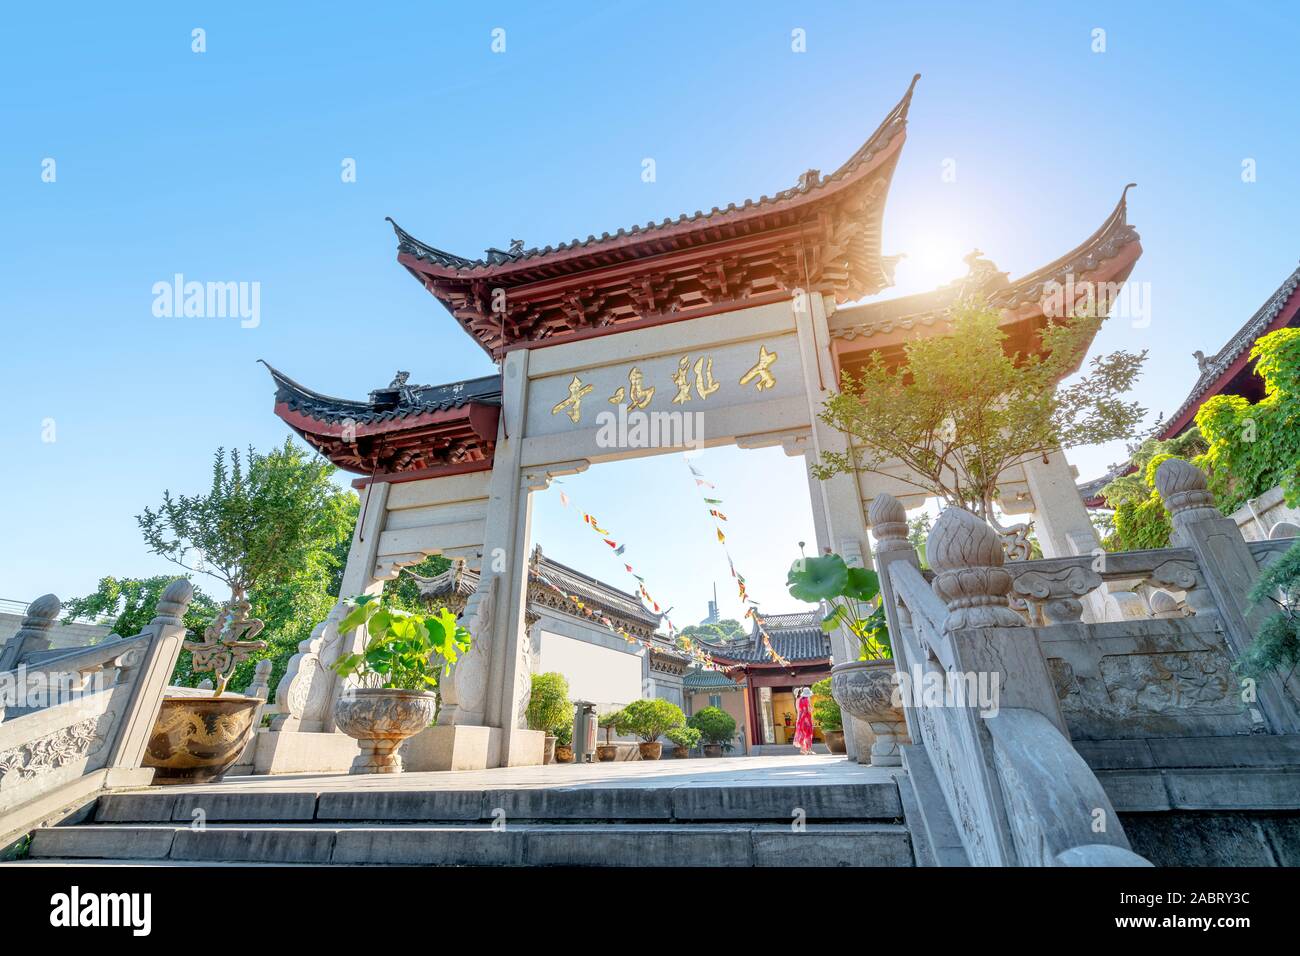 Jiming Temple was built in 1387 and was the center of Buddhism in the Southern Dynasties. Nanjing, China. Translation: 'Jiming Ancient Temple' Stock Photo